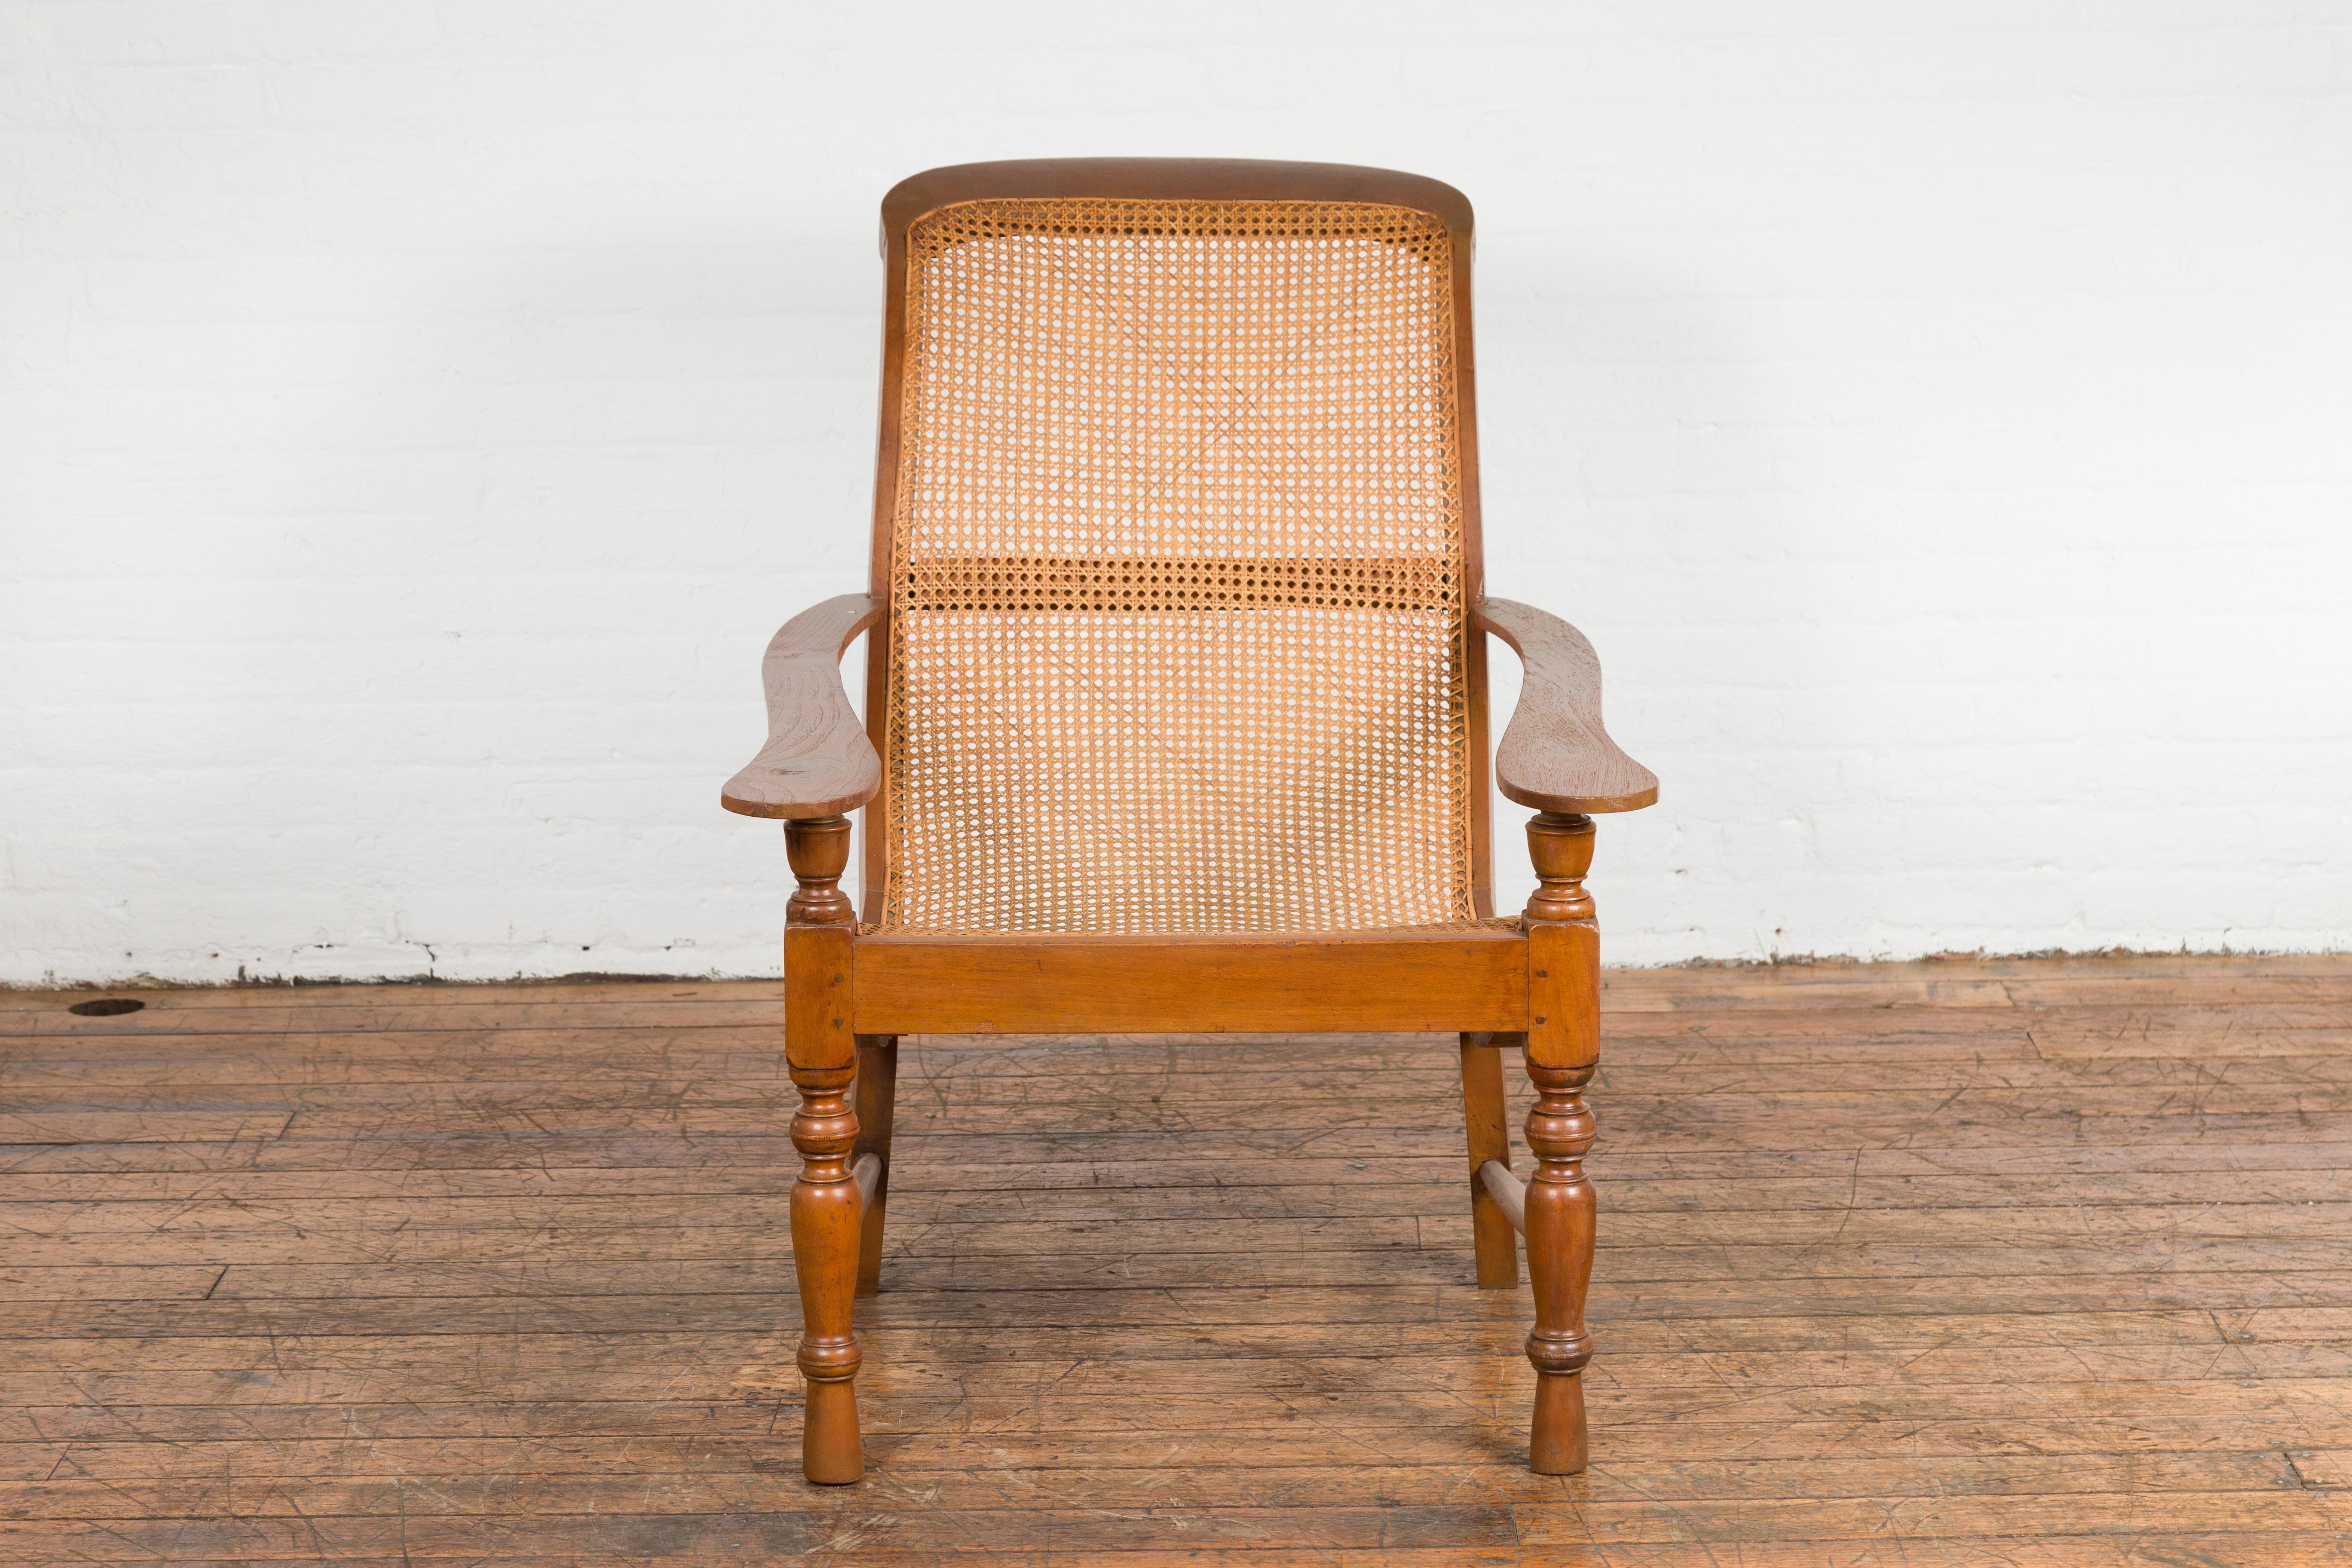 An antique Dutch Colonial Indonesian cane and wood plantation chair from the 20th century with serpentine arms and turned baluster legs. Immerse yourself in the grandeur of Indonesian design with this antique Dutch Colonial plantation chair from the